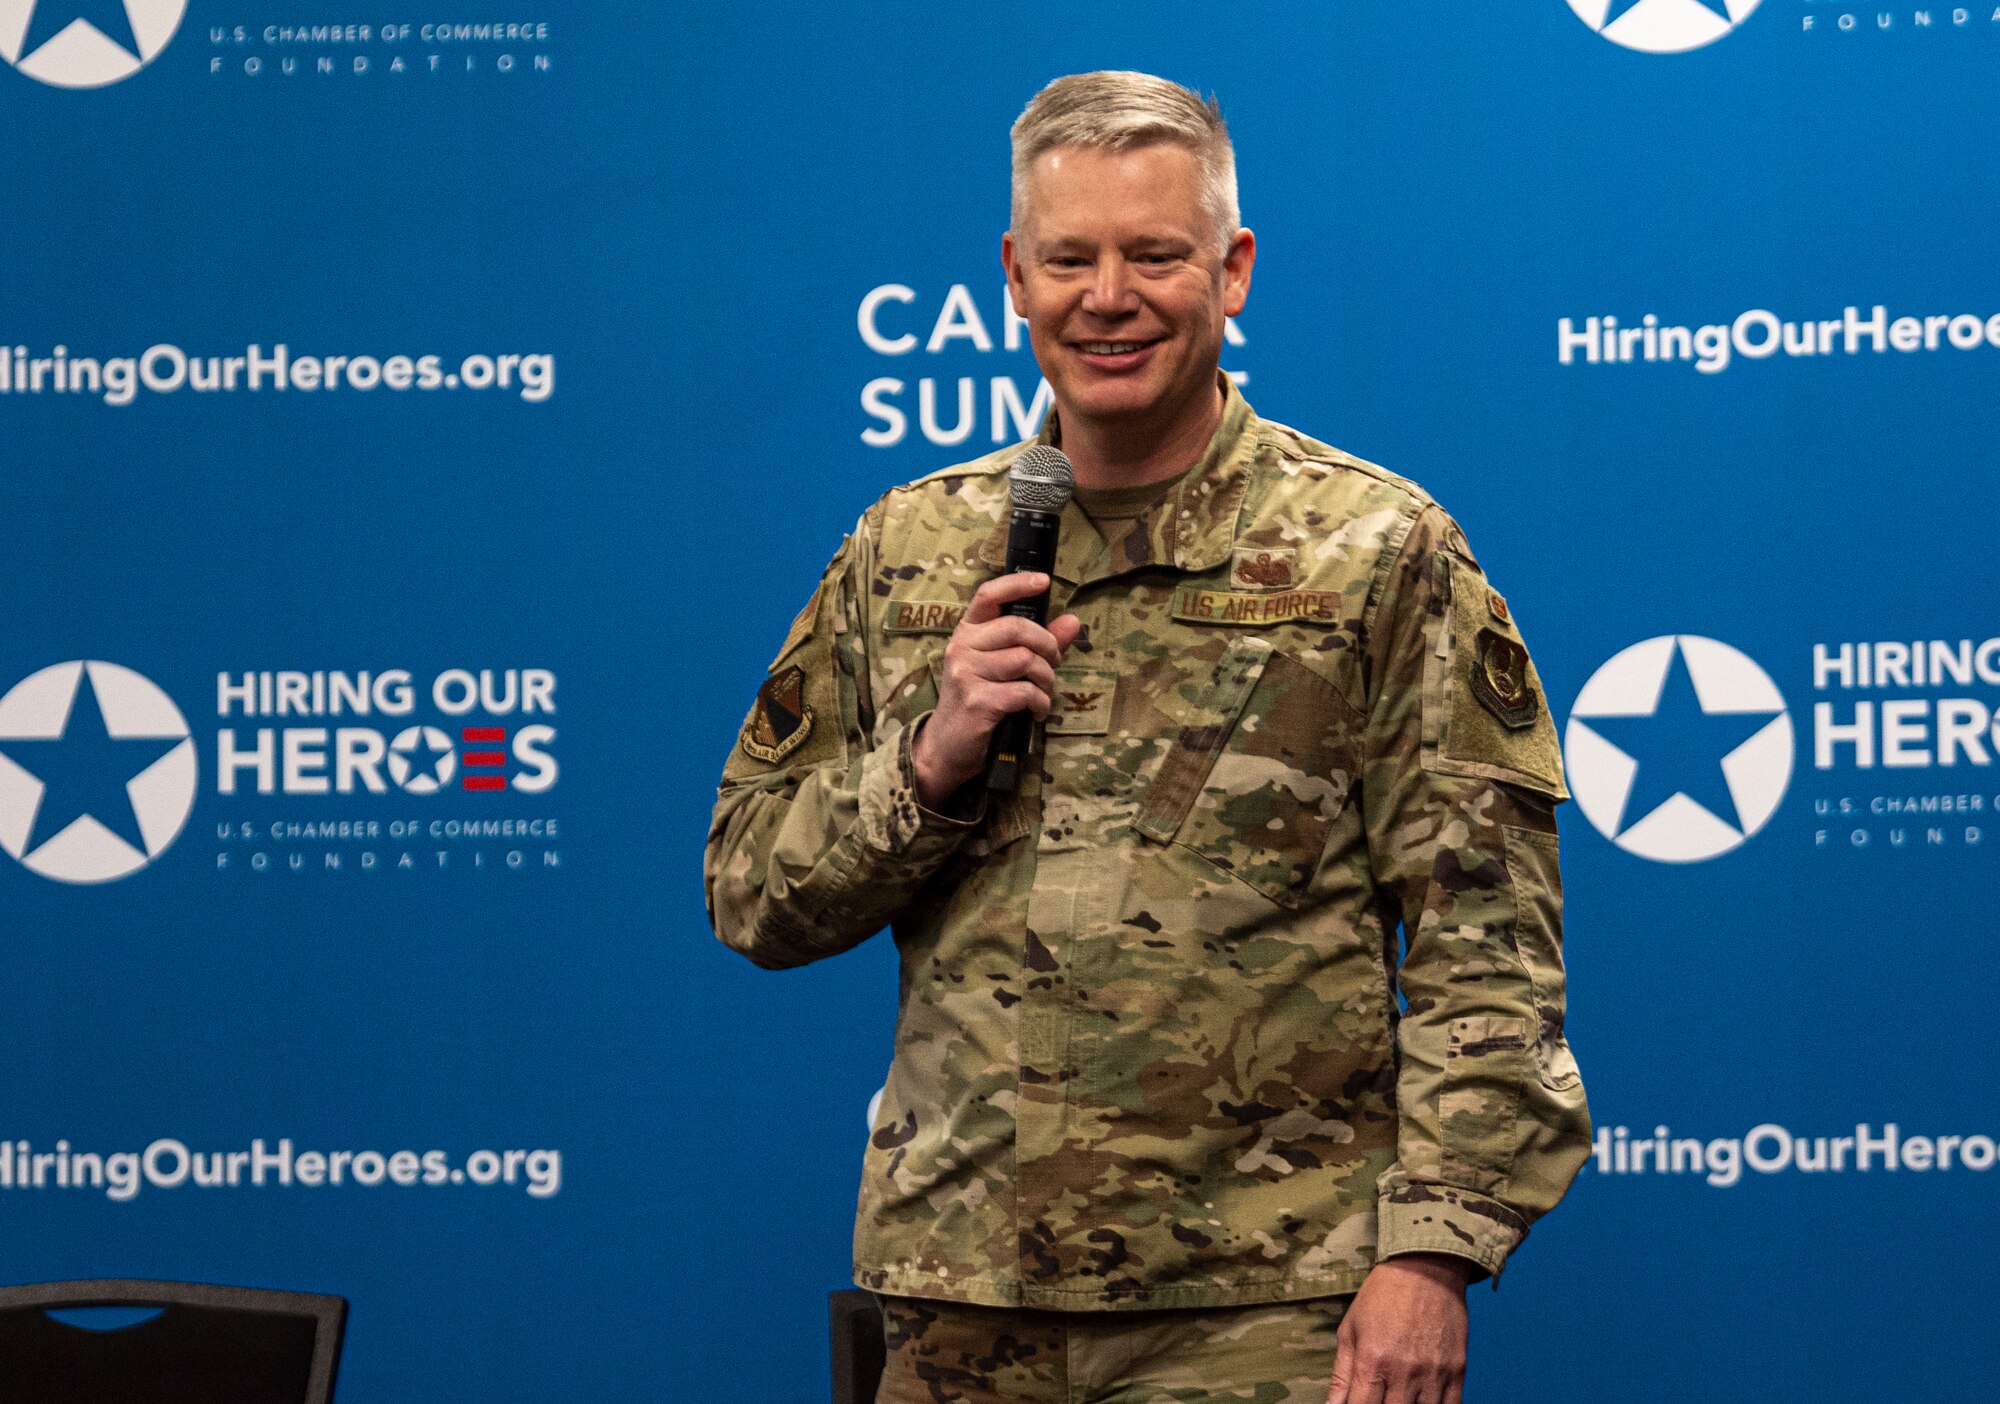 Col. Charles Barkhurst gives remarks during the Hiring Our Heroes Job Fair April 27, 2023, at the Hope Hotel & Richard C. Holbrooke Conference Center, Wright-Patterson Air Force Base, Ohio. The U.S. Chamber of Commerce Foundation’s annual hiring event helps transitioning service members, veterans and military spouses find employment. (U.S. Air Force photo by Airman 1st Class Elizabeth Figueroa)